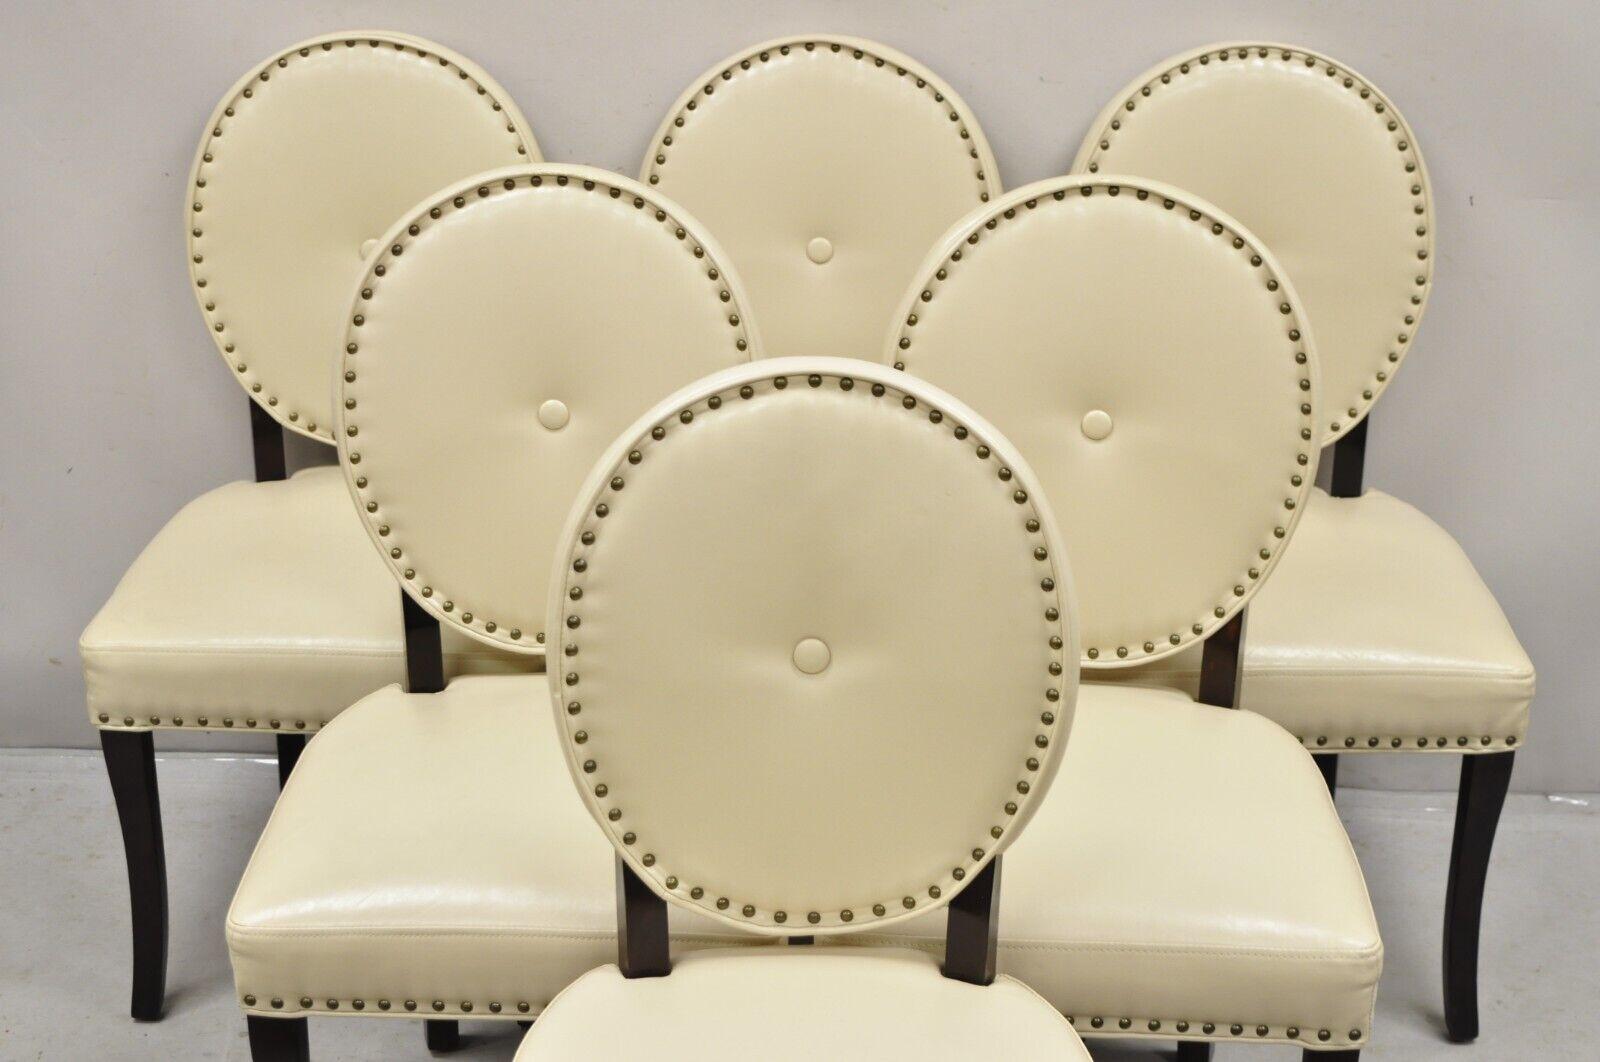 Pier 1 Imports Cadence Ivory Nailhead Oval Back Dining Chairs - Set of 6 For Sale 3